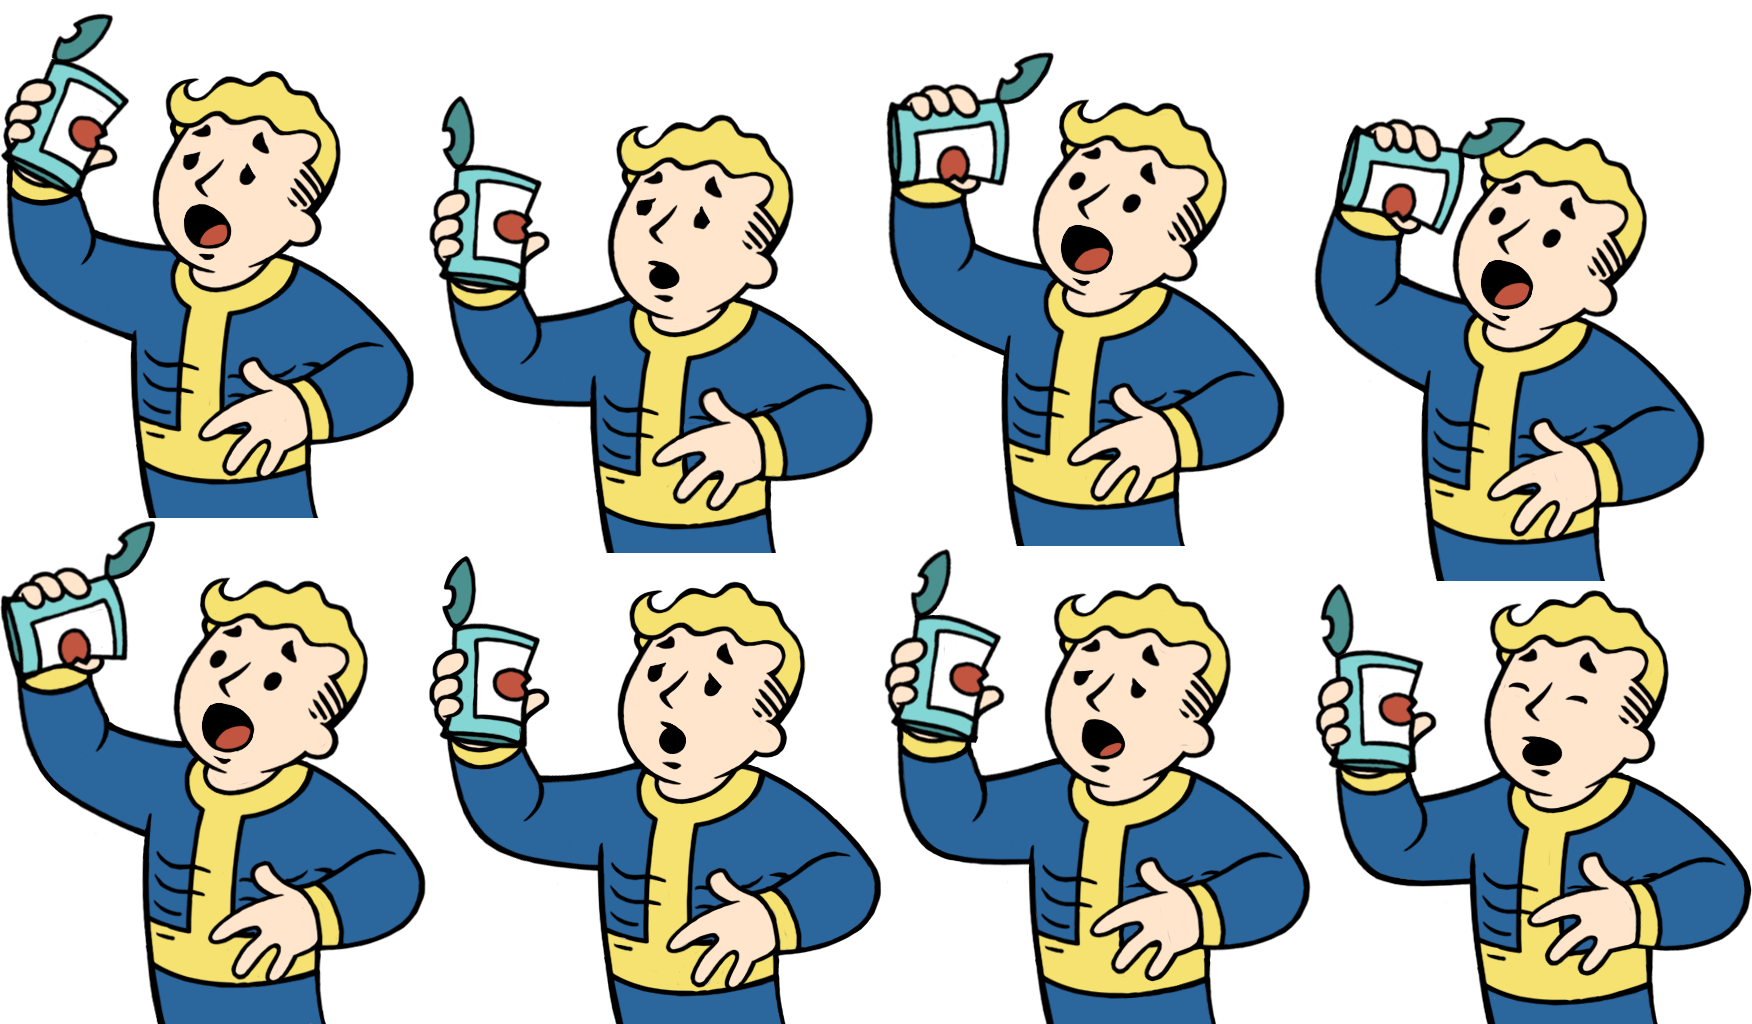 fallout shelter special characters